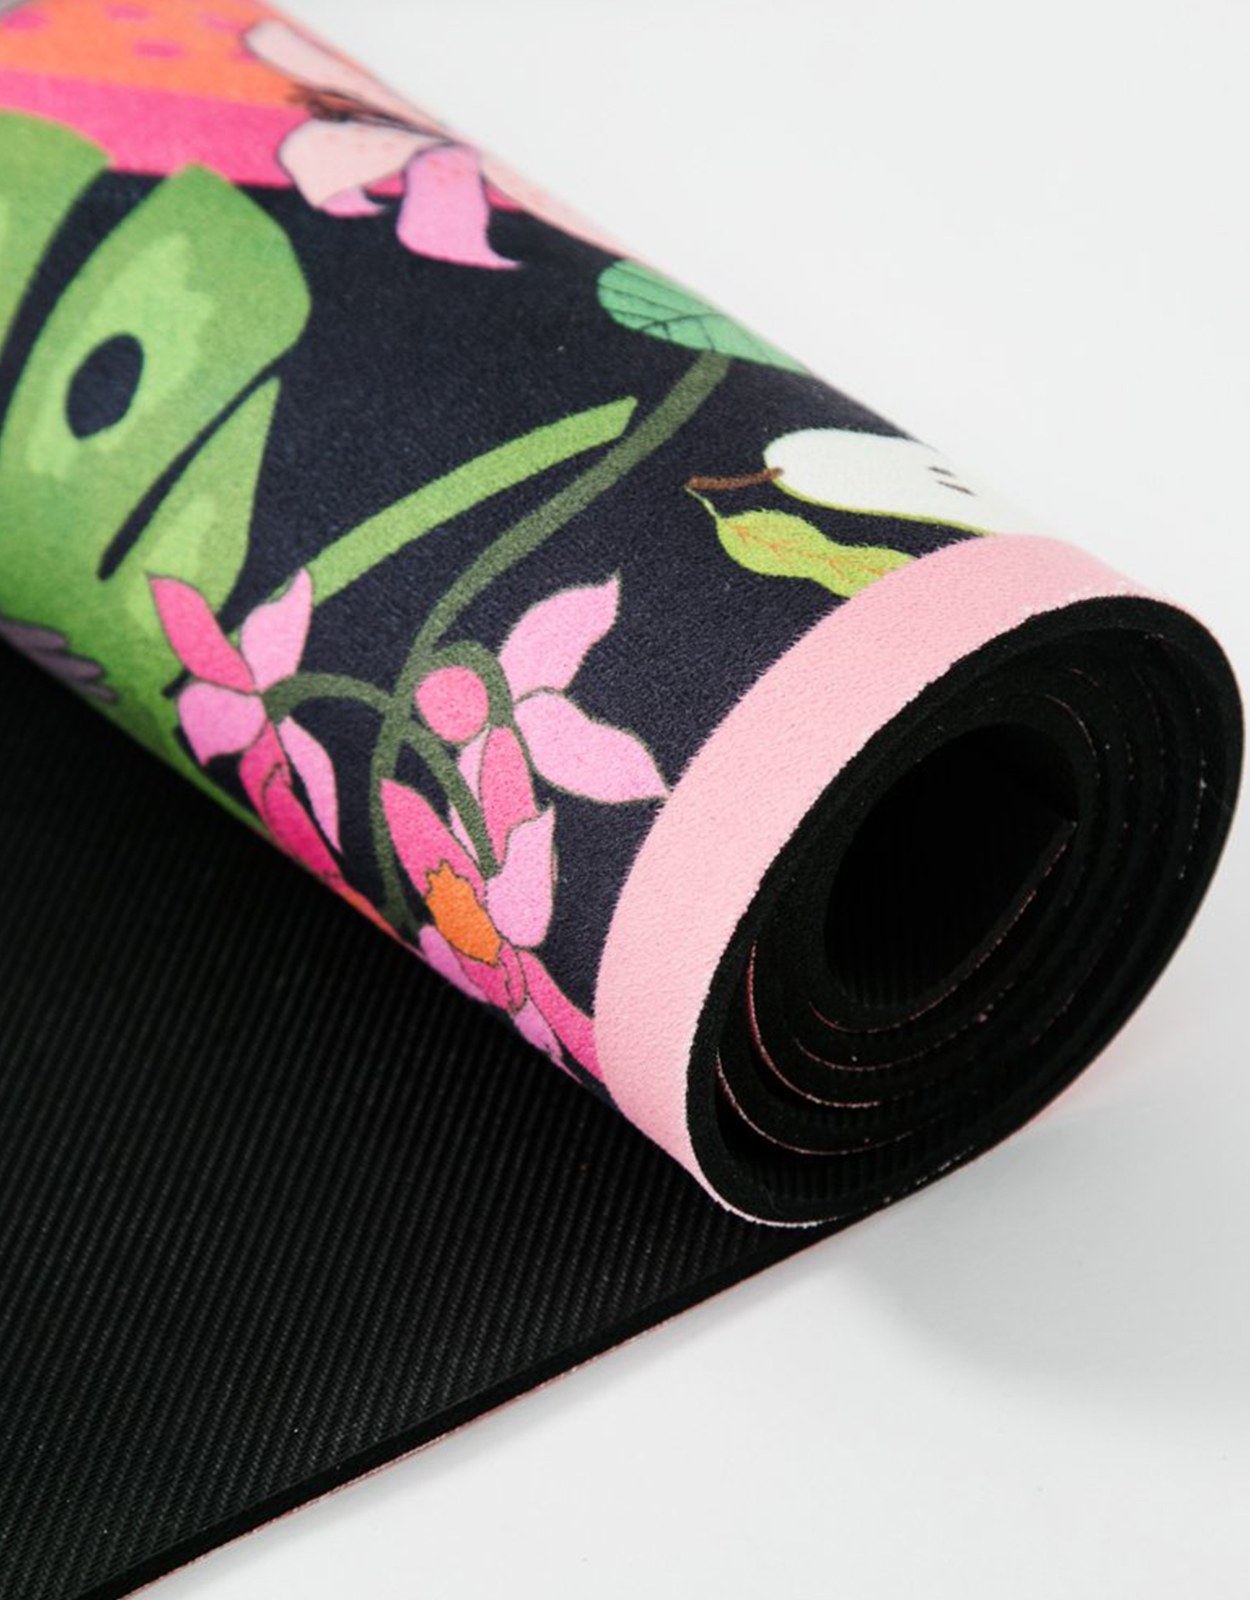 Sugarmat suede natural rubber yoga mat 5.0mm The Spotty Paradise